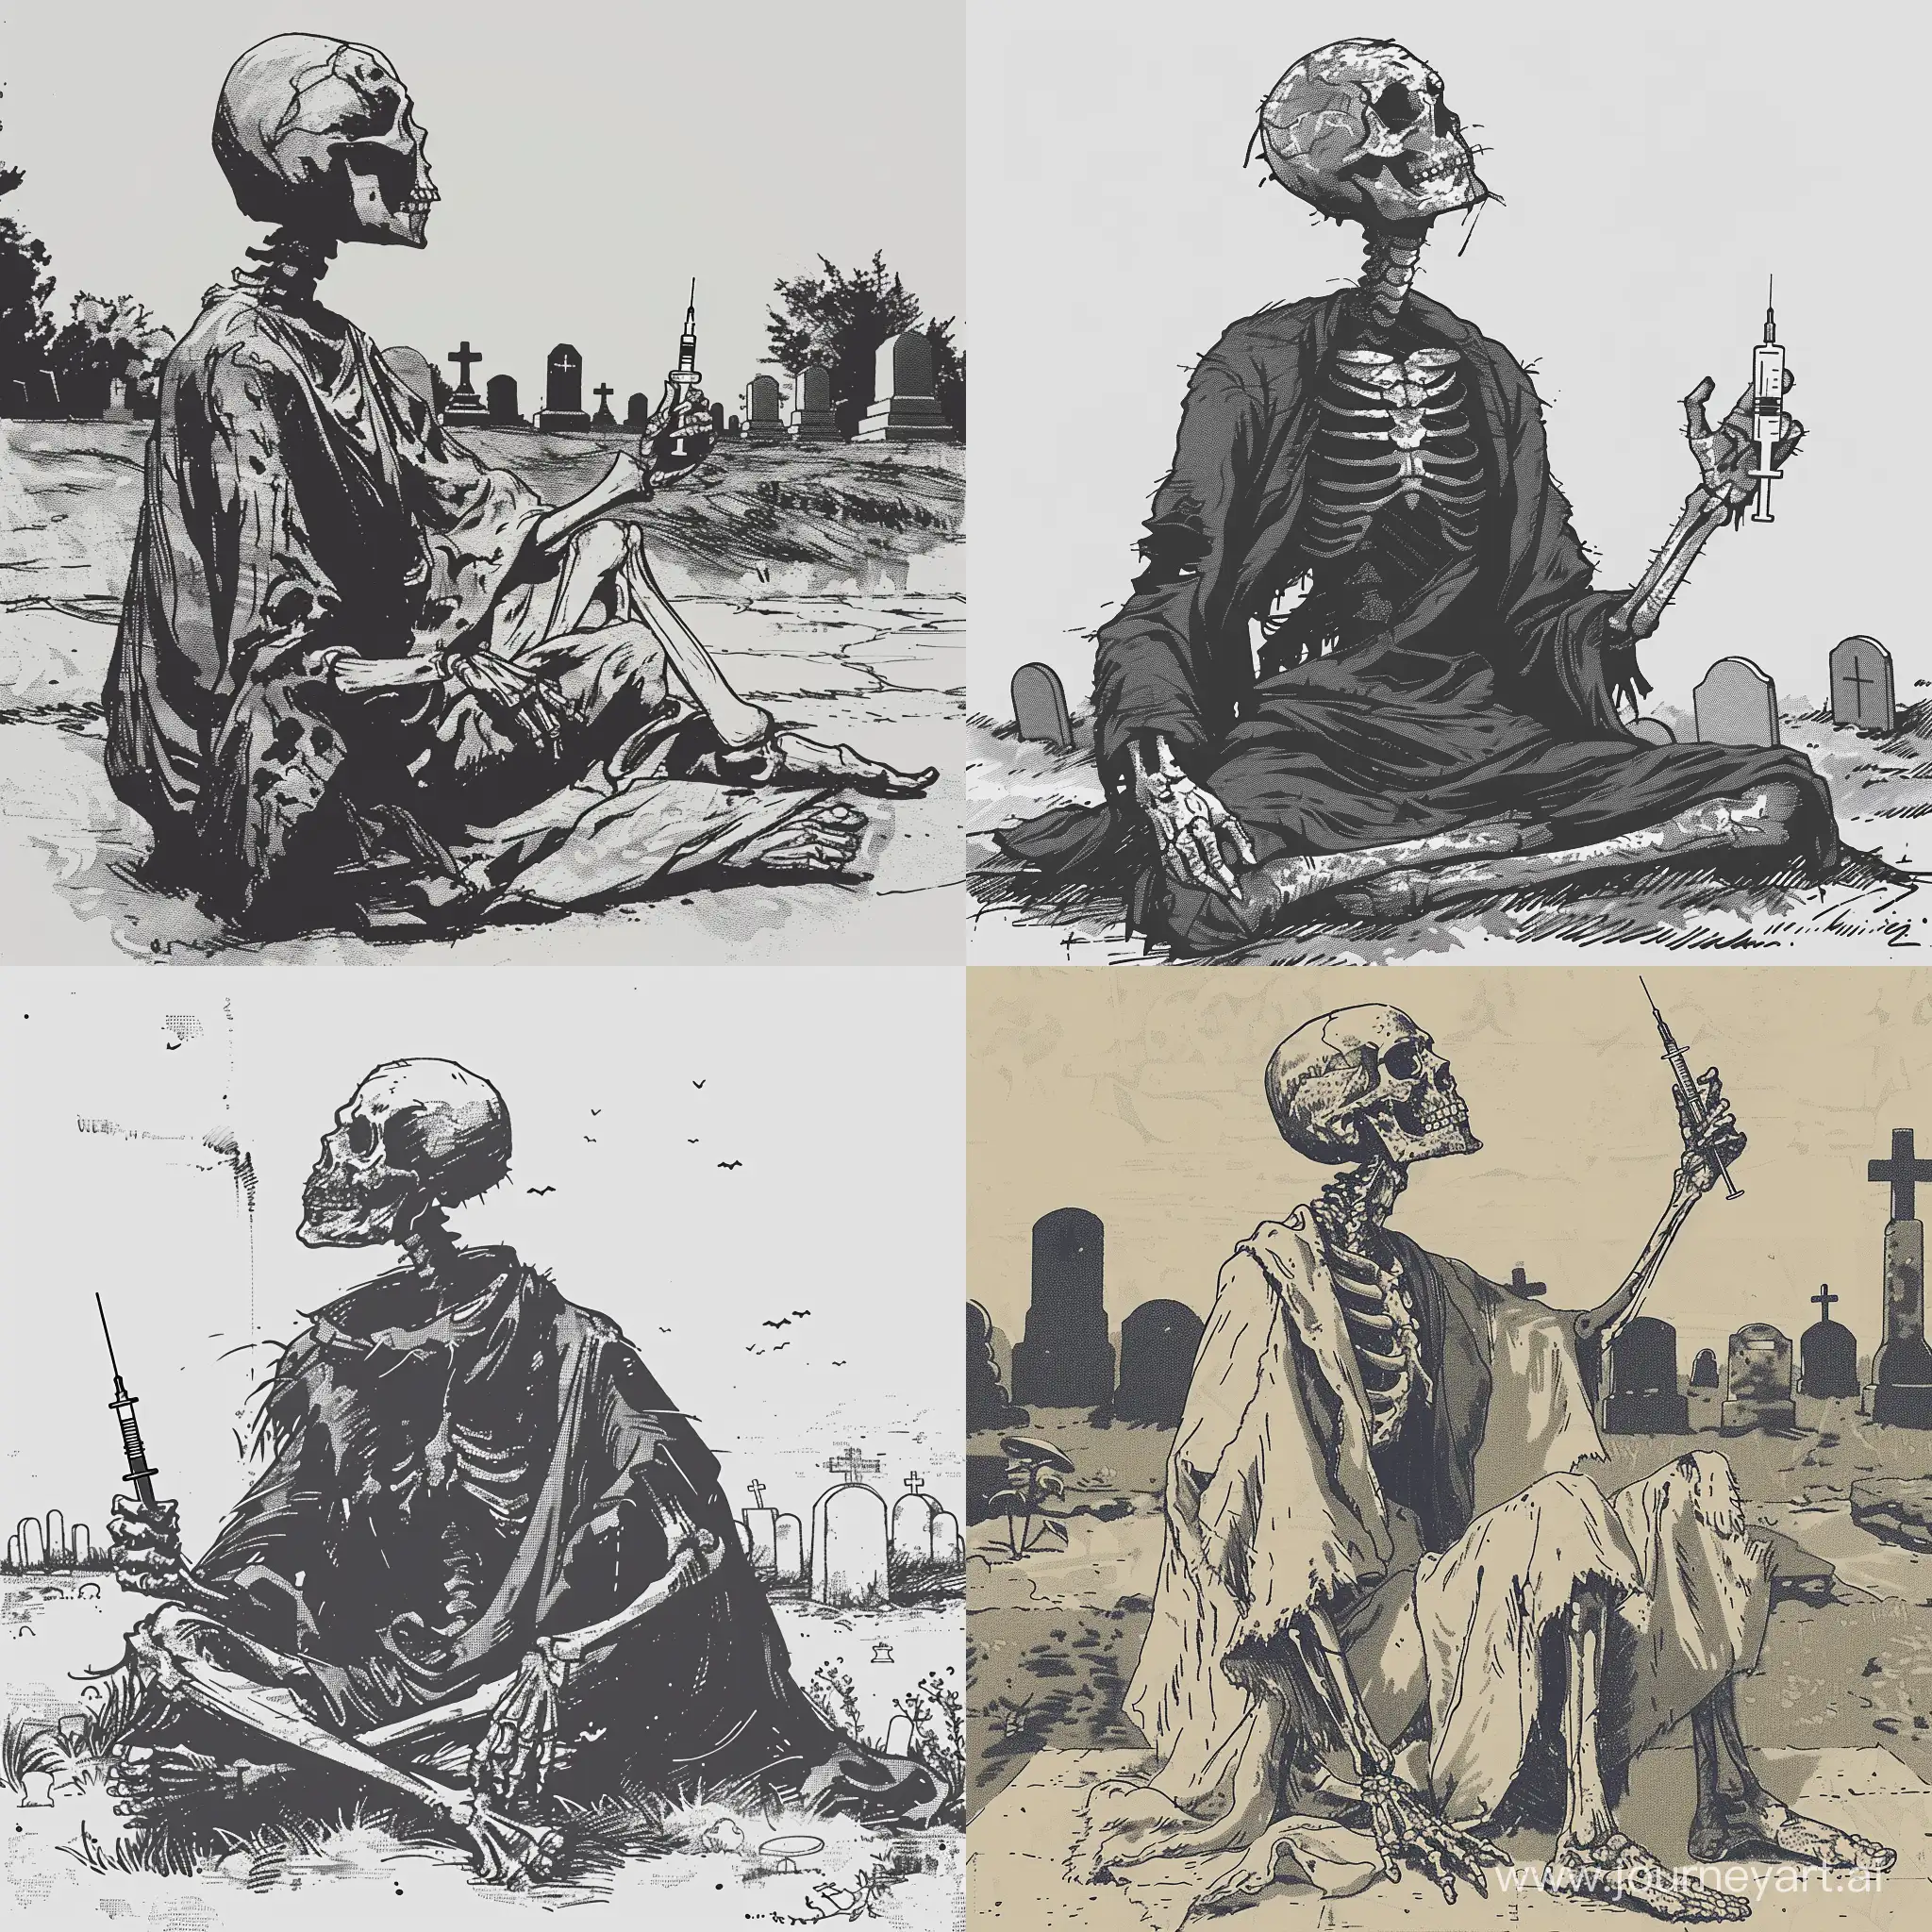 Skeleton, torn robe, cemetery, sitting position, syringe in hand, in a hand-drawn style, against the background of the cemetery